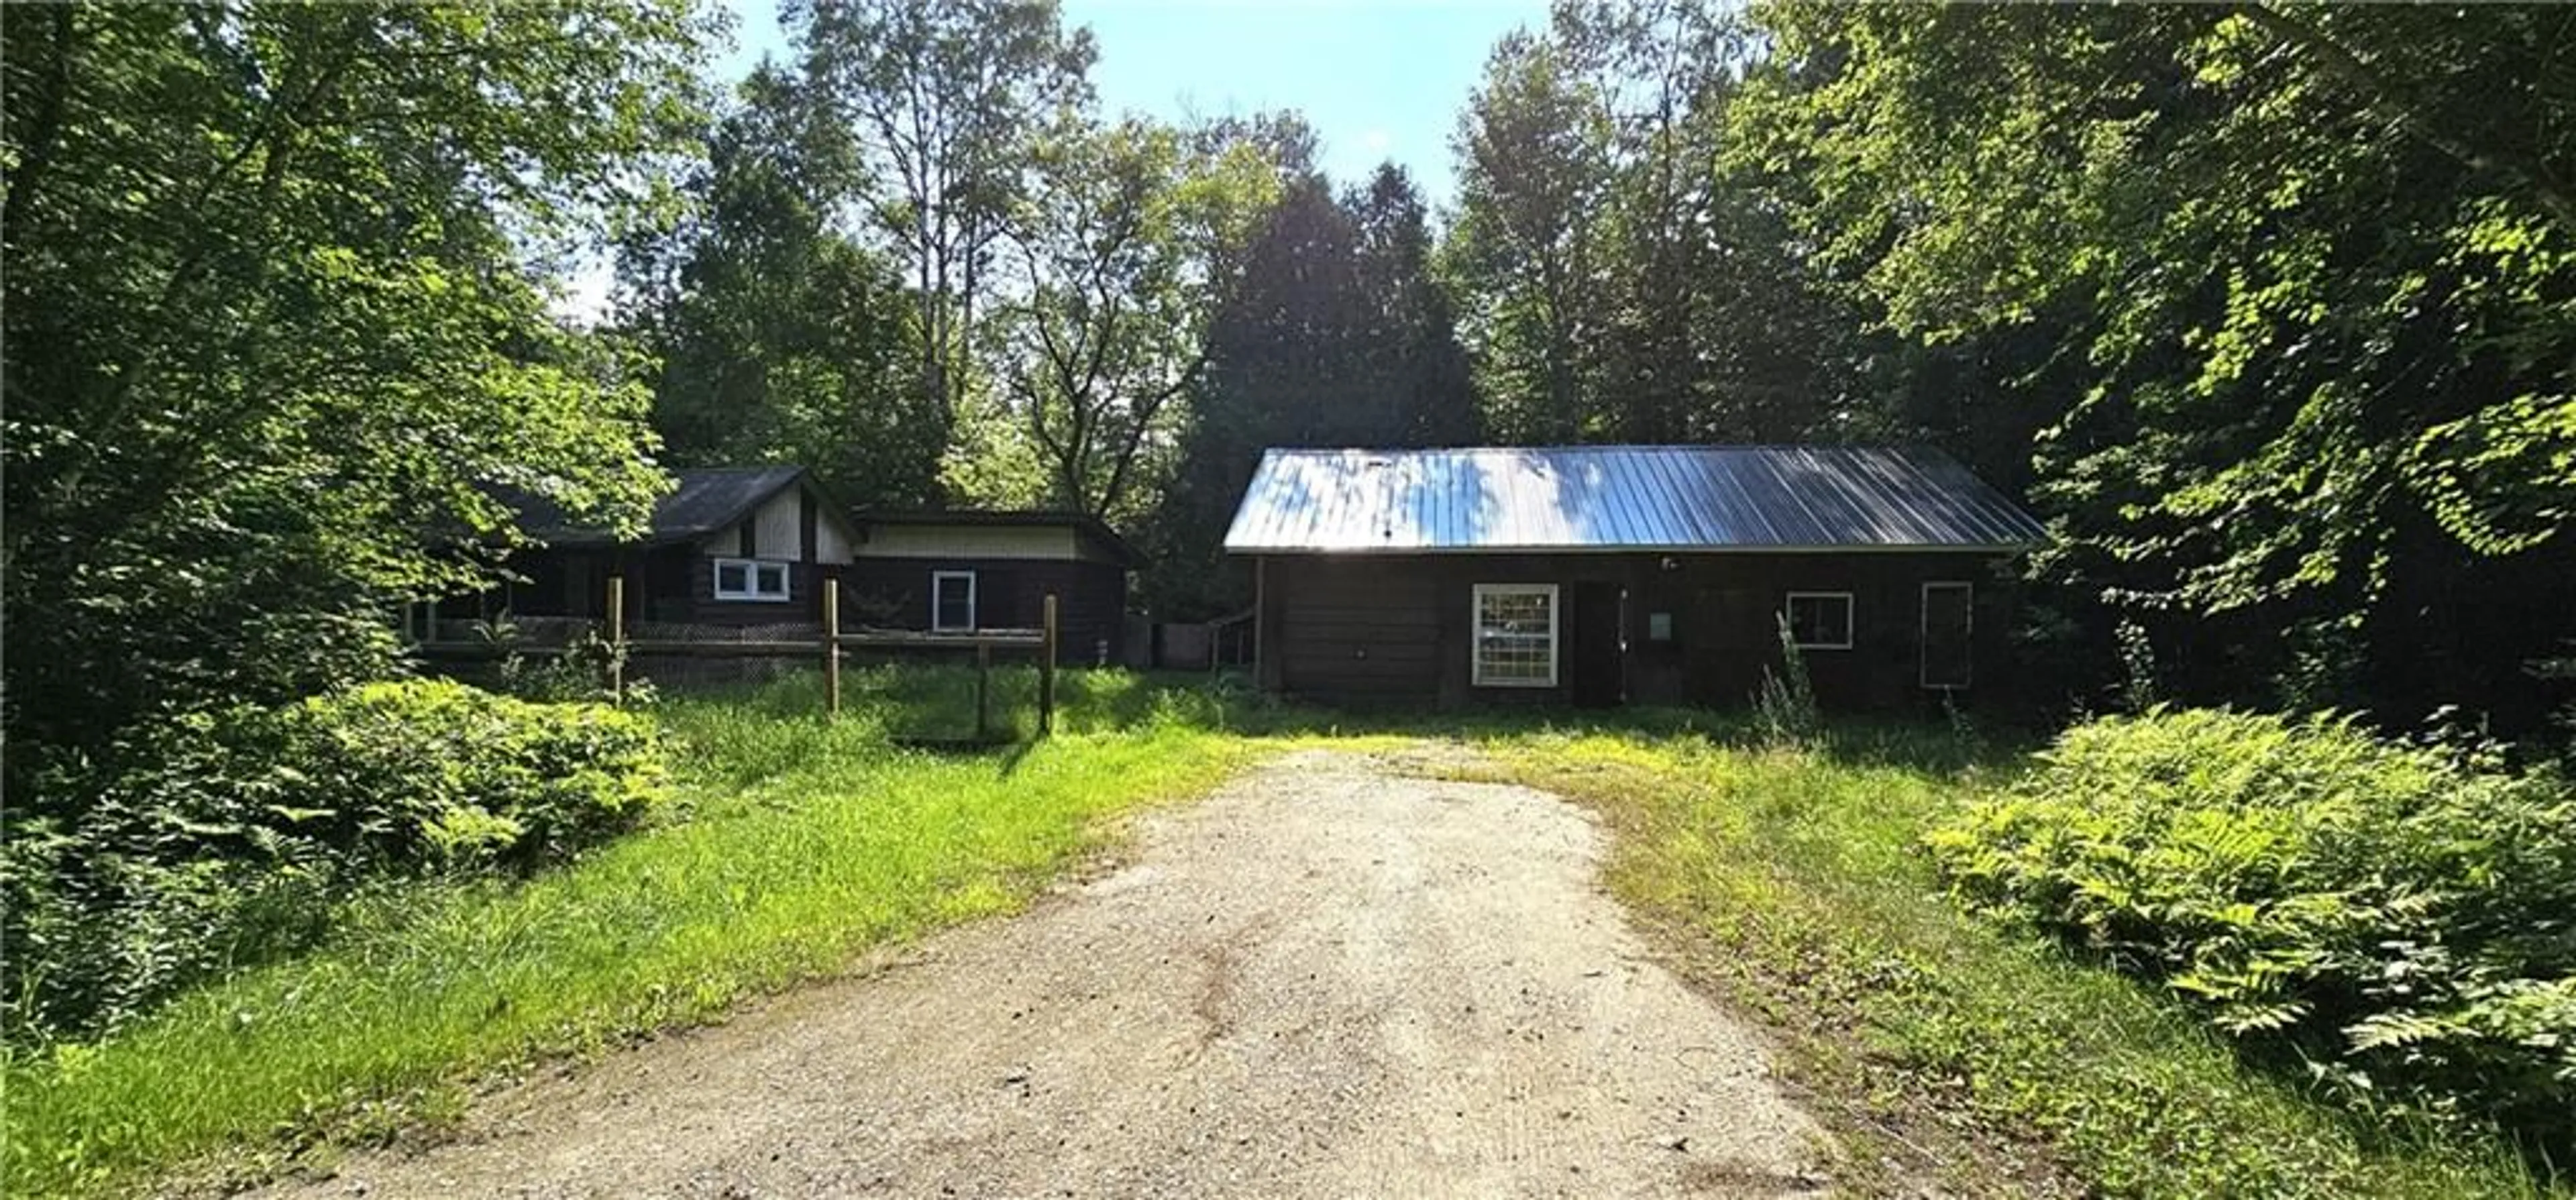 Cottage for 32595B 17 Hwy, Deep River Ontario K0J 1P0